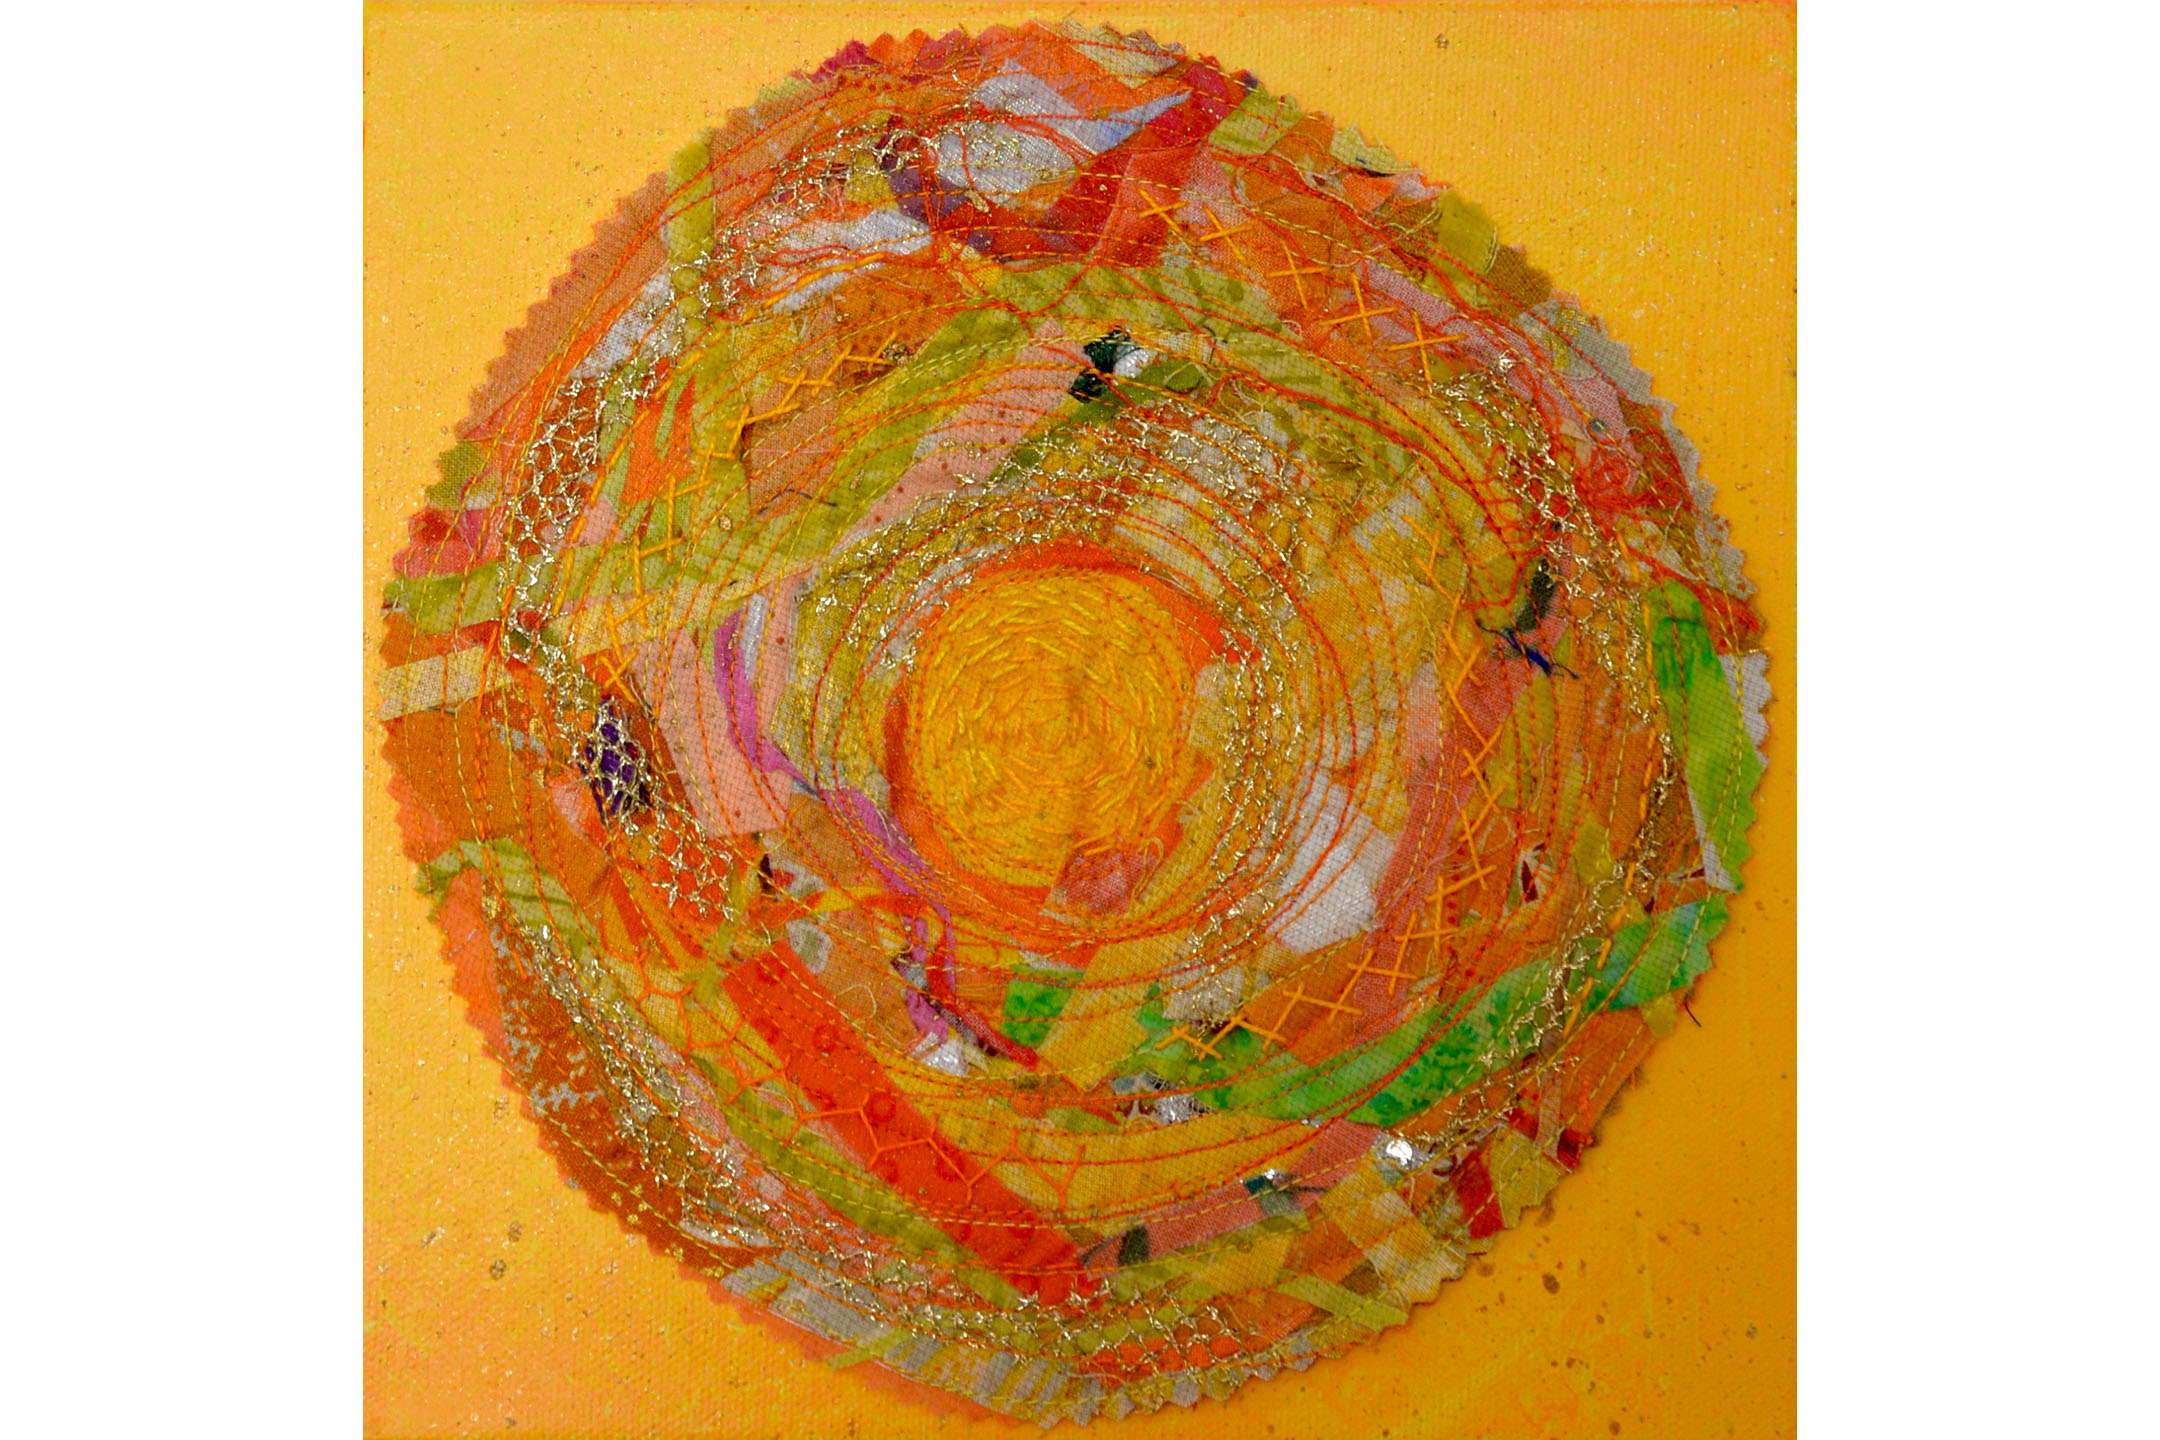 Diane Rode Schneck, Here Comes the Sun, Mixed media on canvas, 8” x 8”, 2016